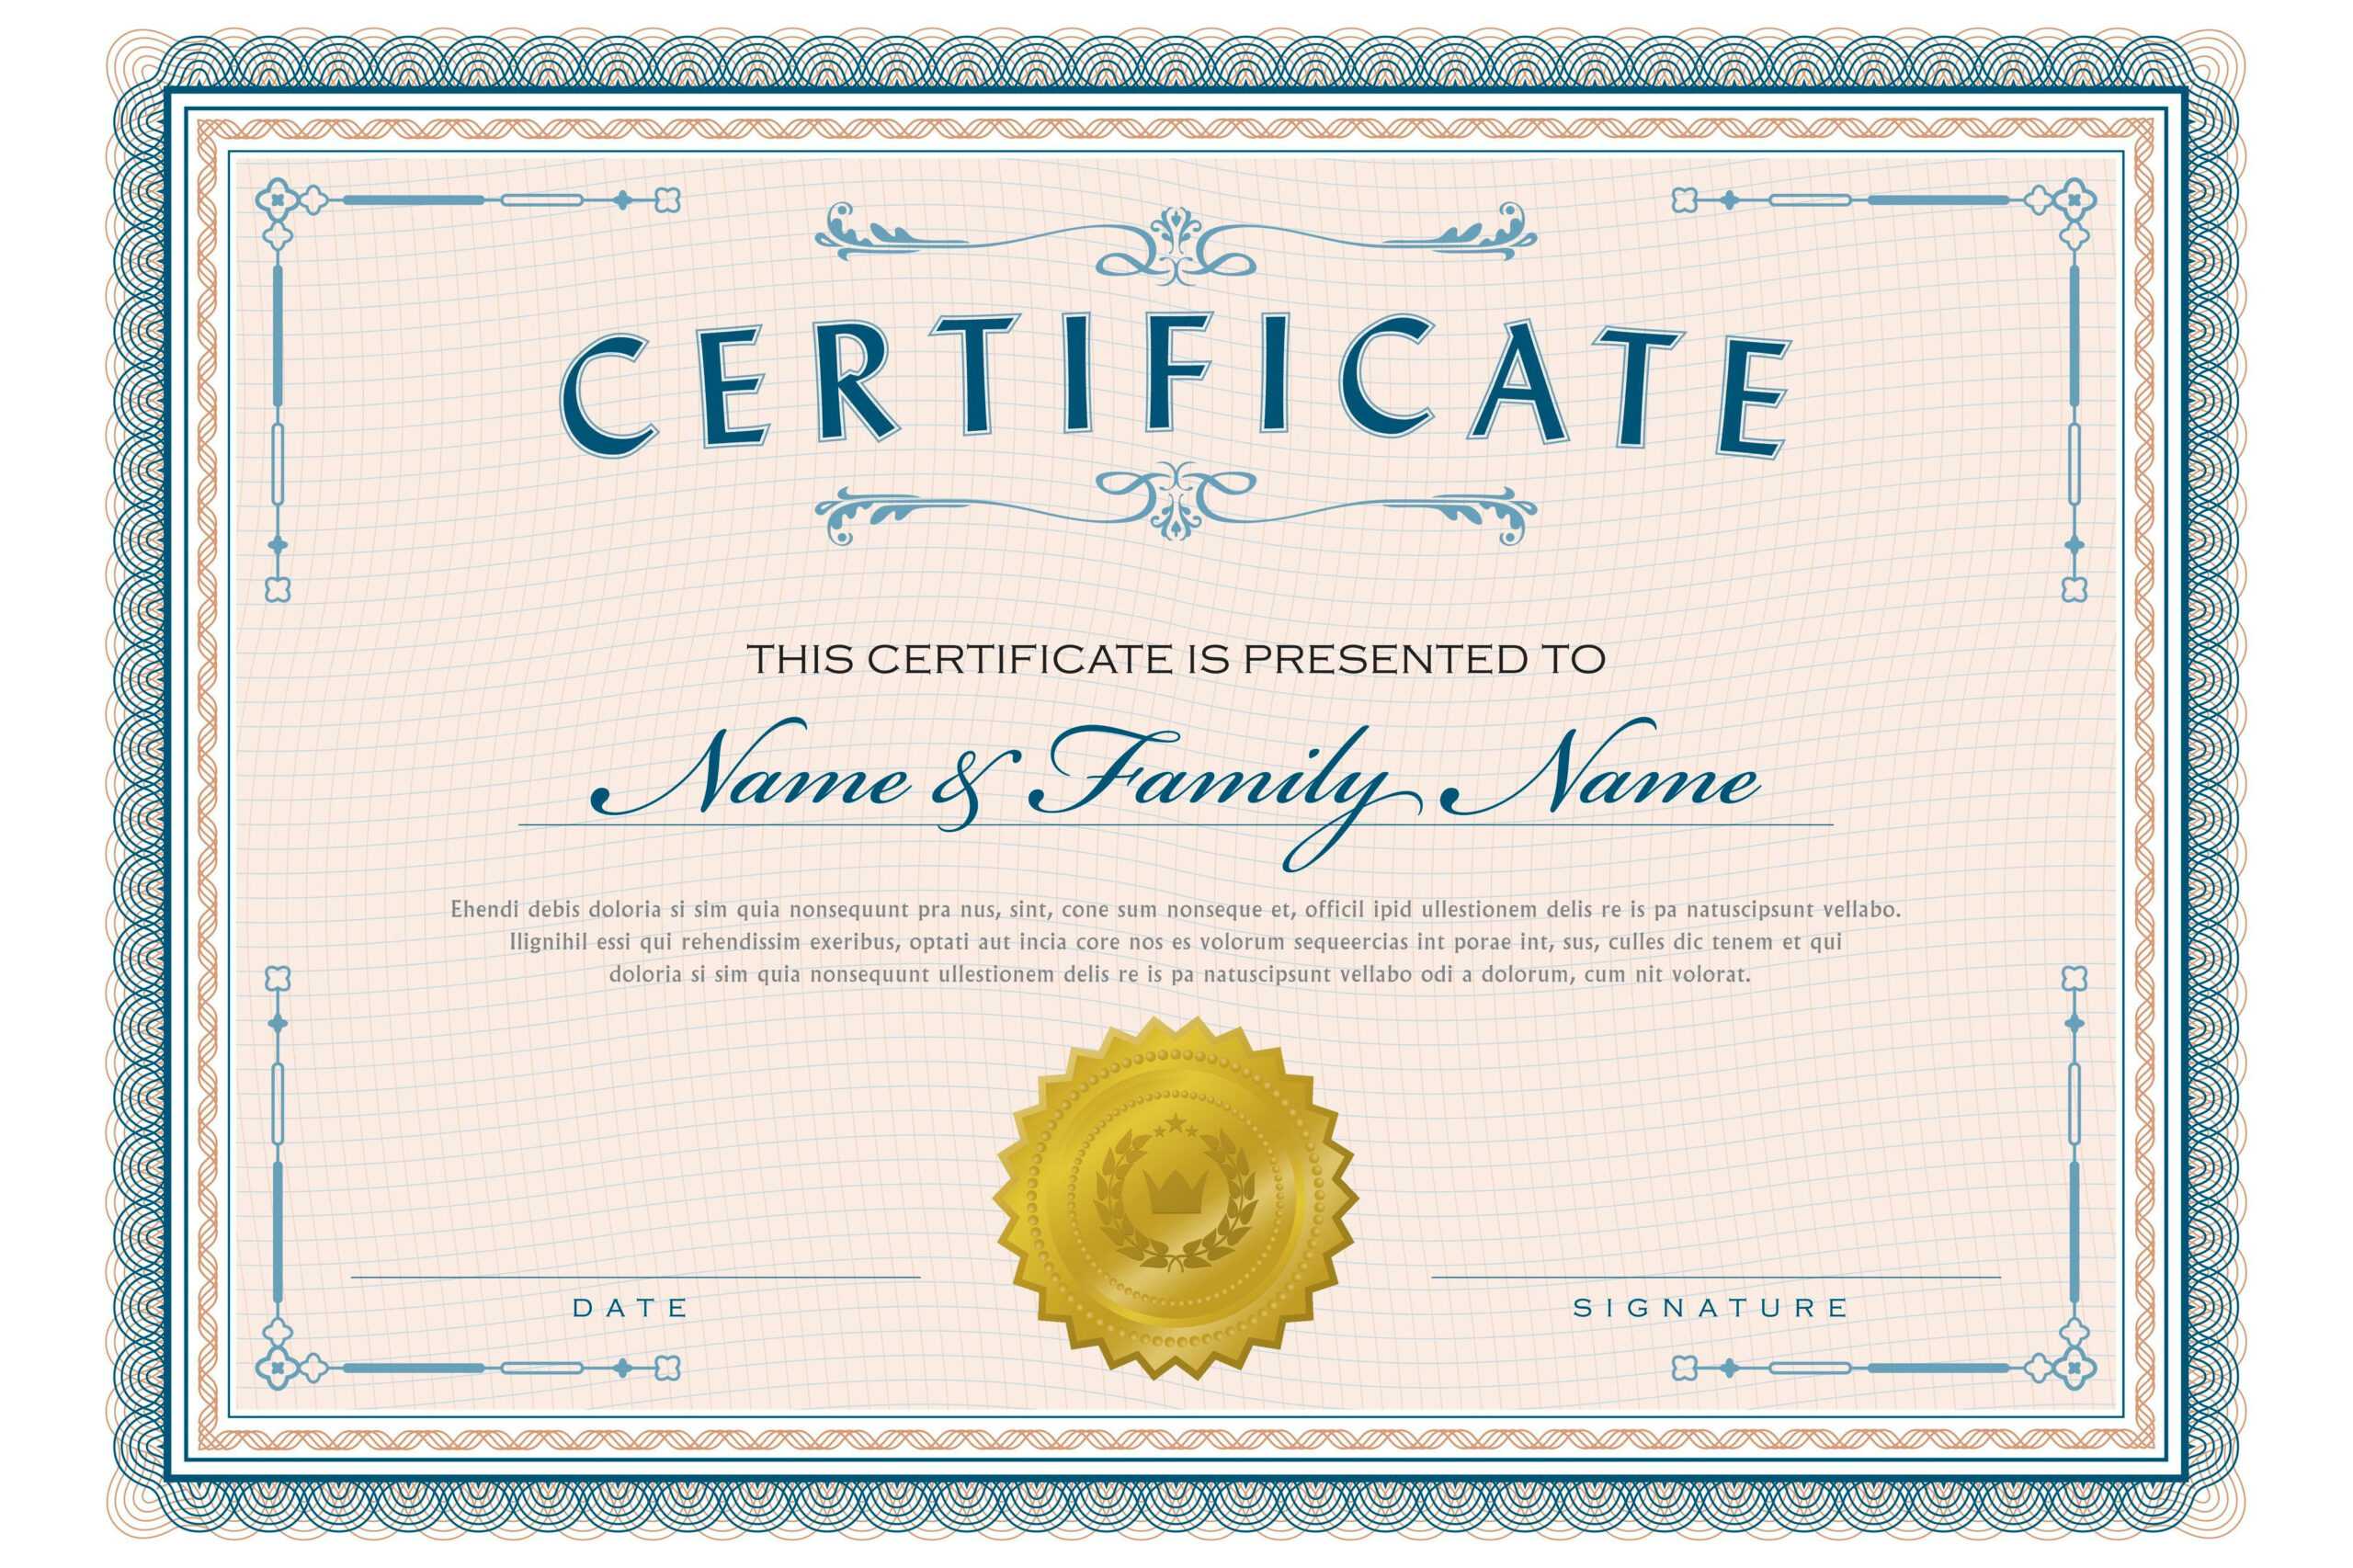 Necessary Parts Of An Award Certificate In Spelling Bee Award Certificate Template